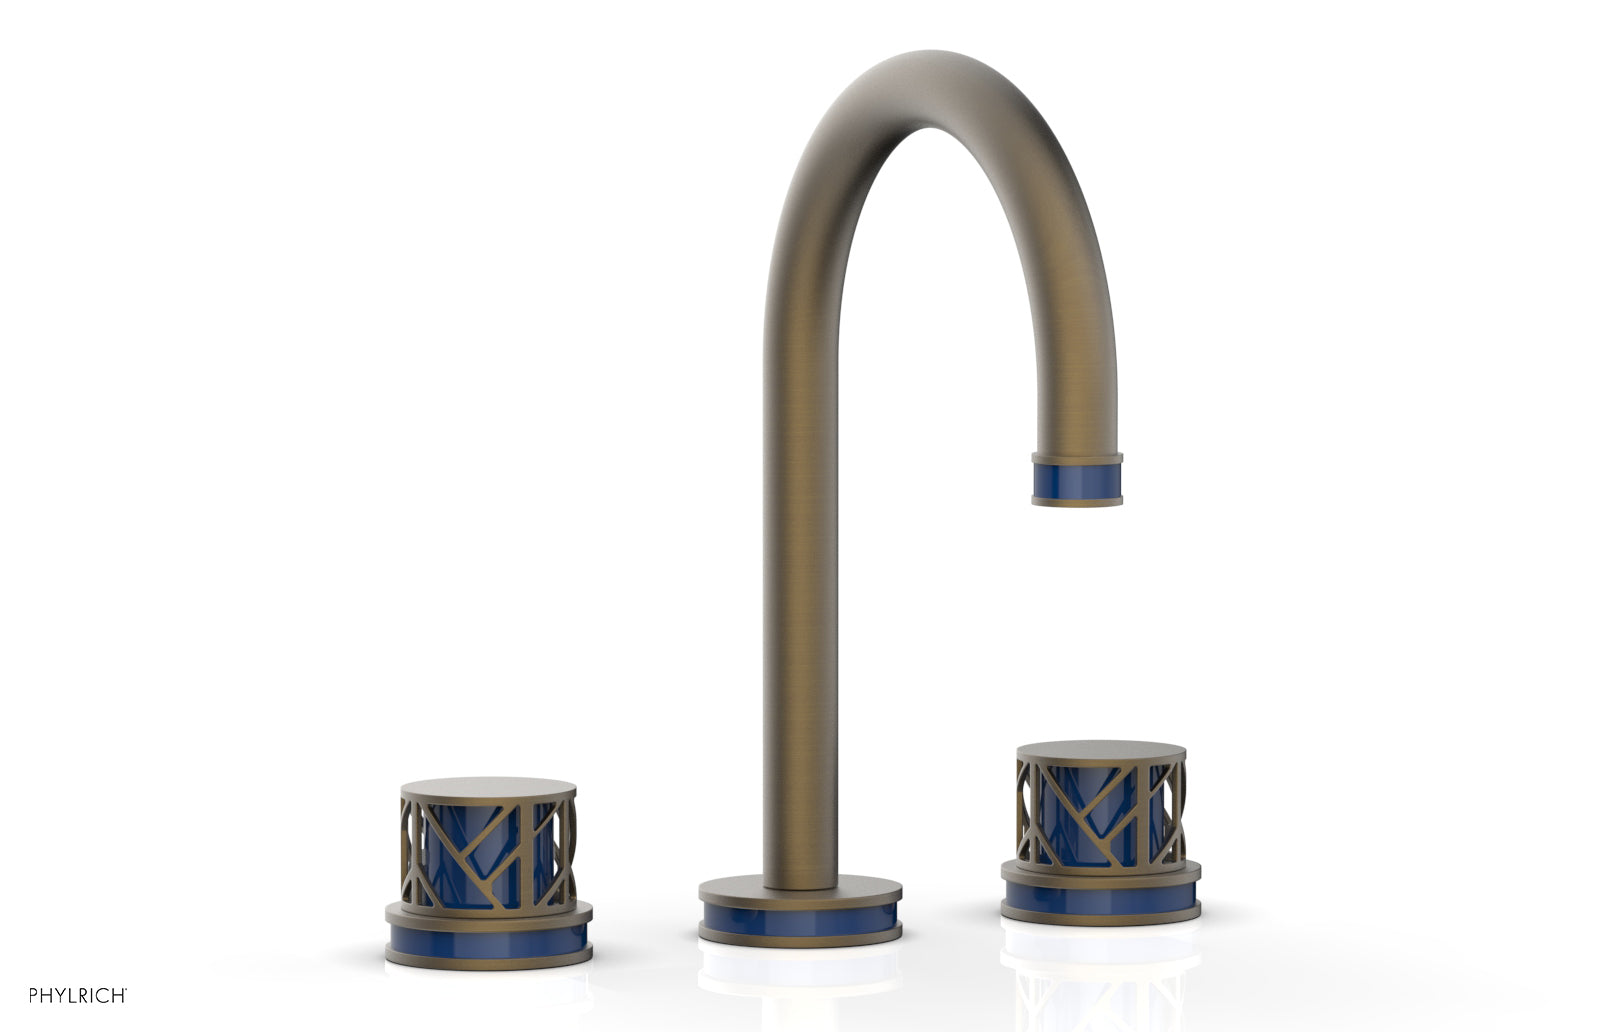 Phylrich JOLIE Widespread Faucet - Round Handles with "Navy Blue" Accents